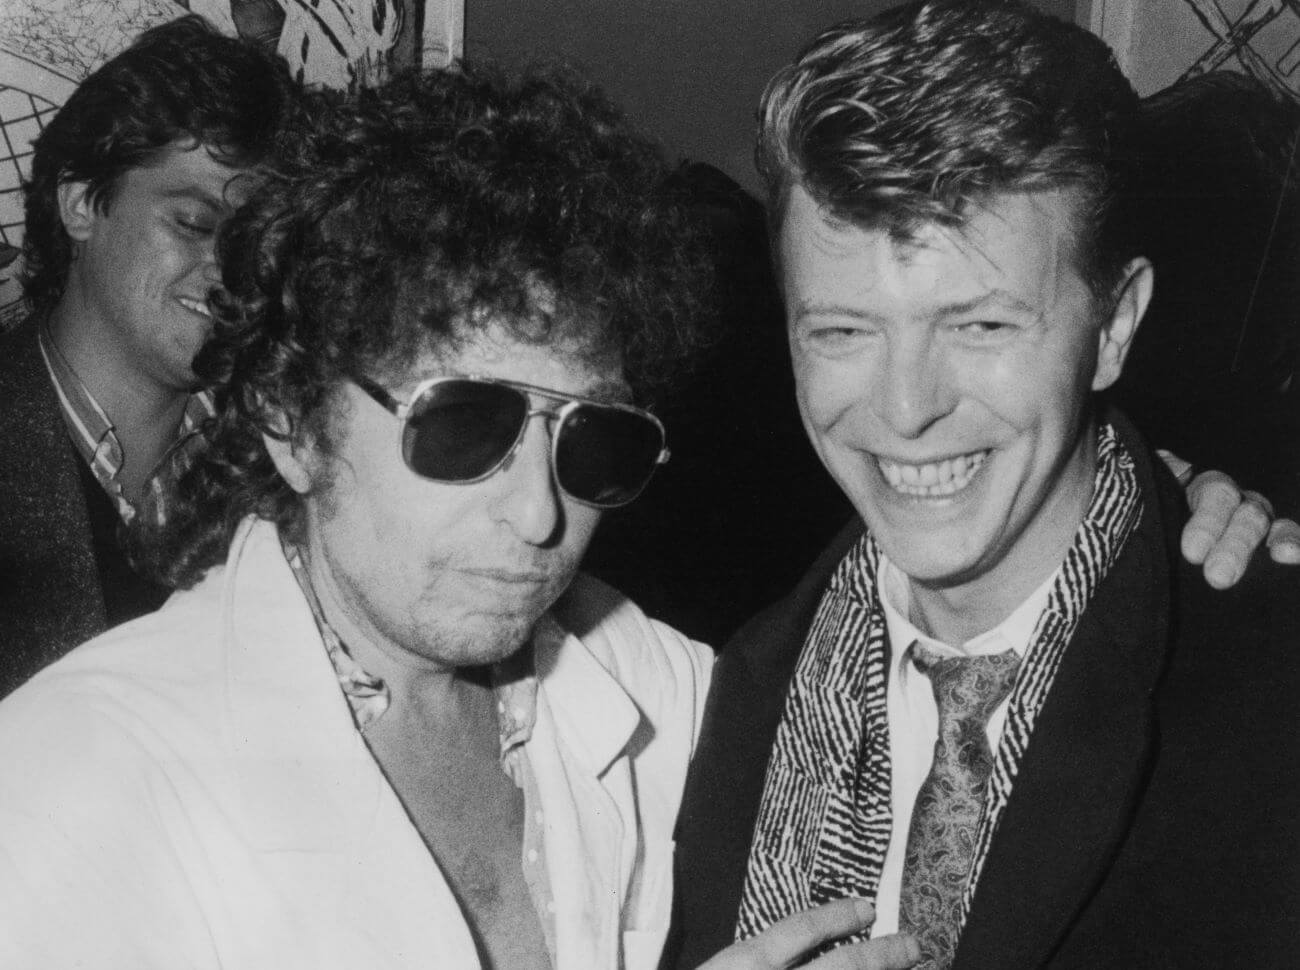 A black and white picture of Bob Dylan standing with his arm around David Bowie's shoulders. Dylan wears sunglasses.